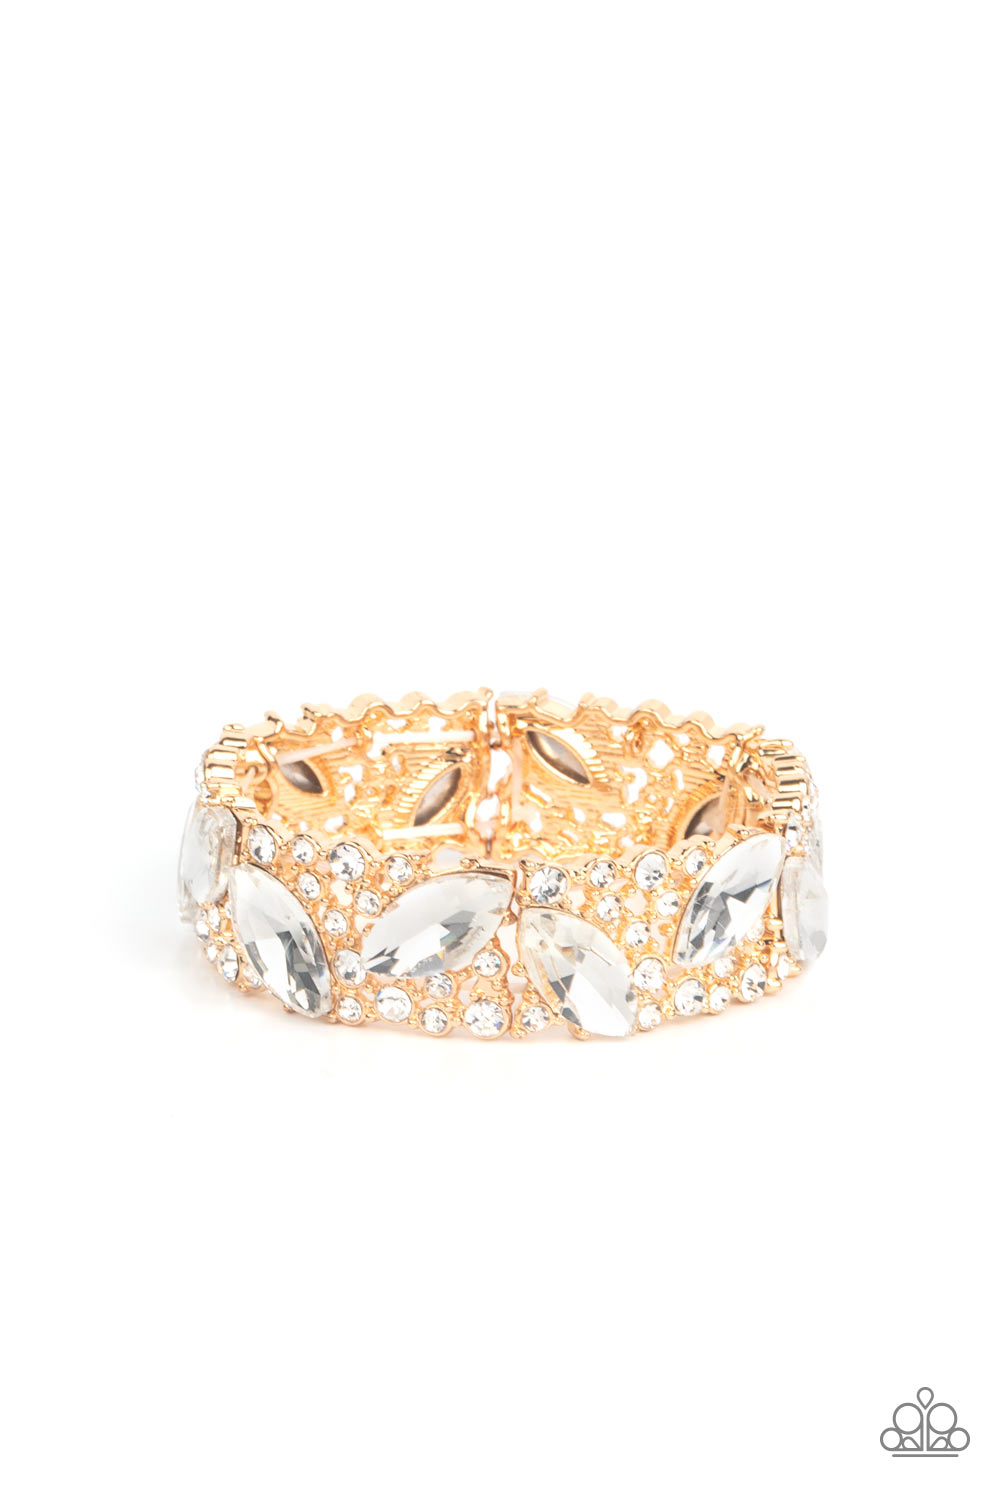 Oversized marquise cut white rhinestones sparkle atop icy frames of dainty gold studs and white rhinestones that are threaded along stretchy bands around the wrist for a jaw-dropping dazzle.  Sold as one individual bracelet.